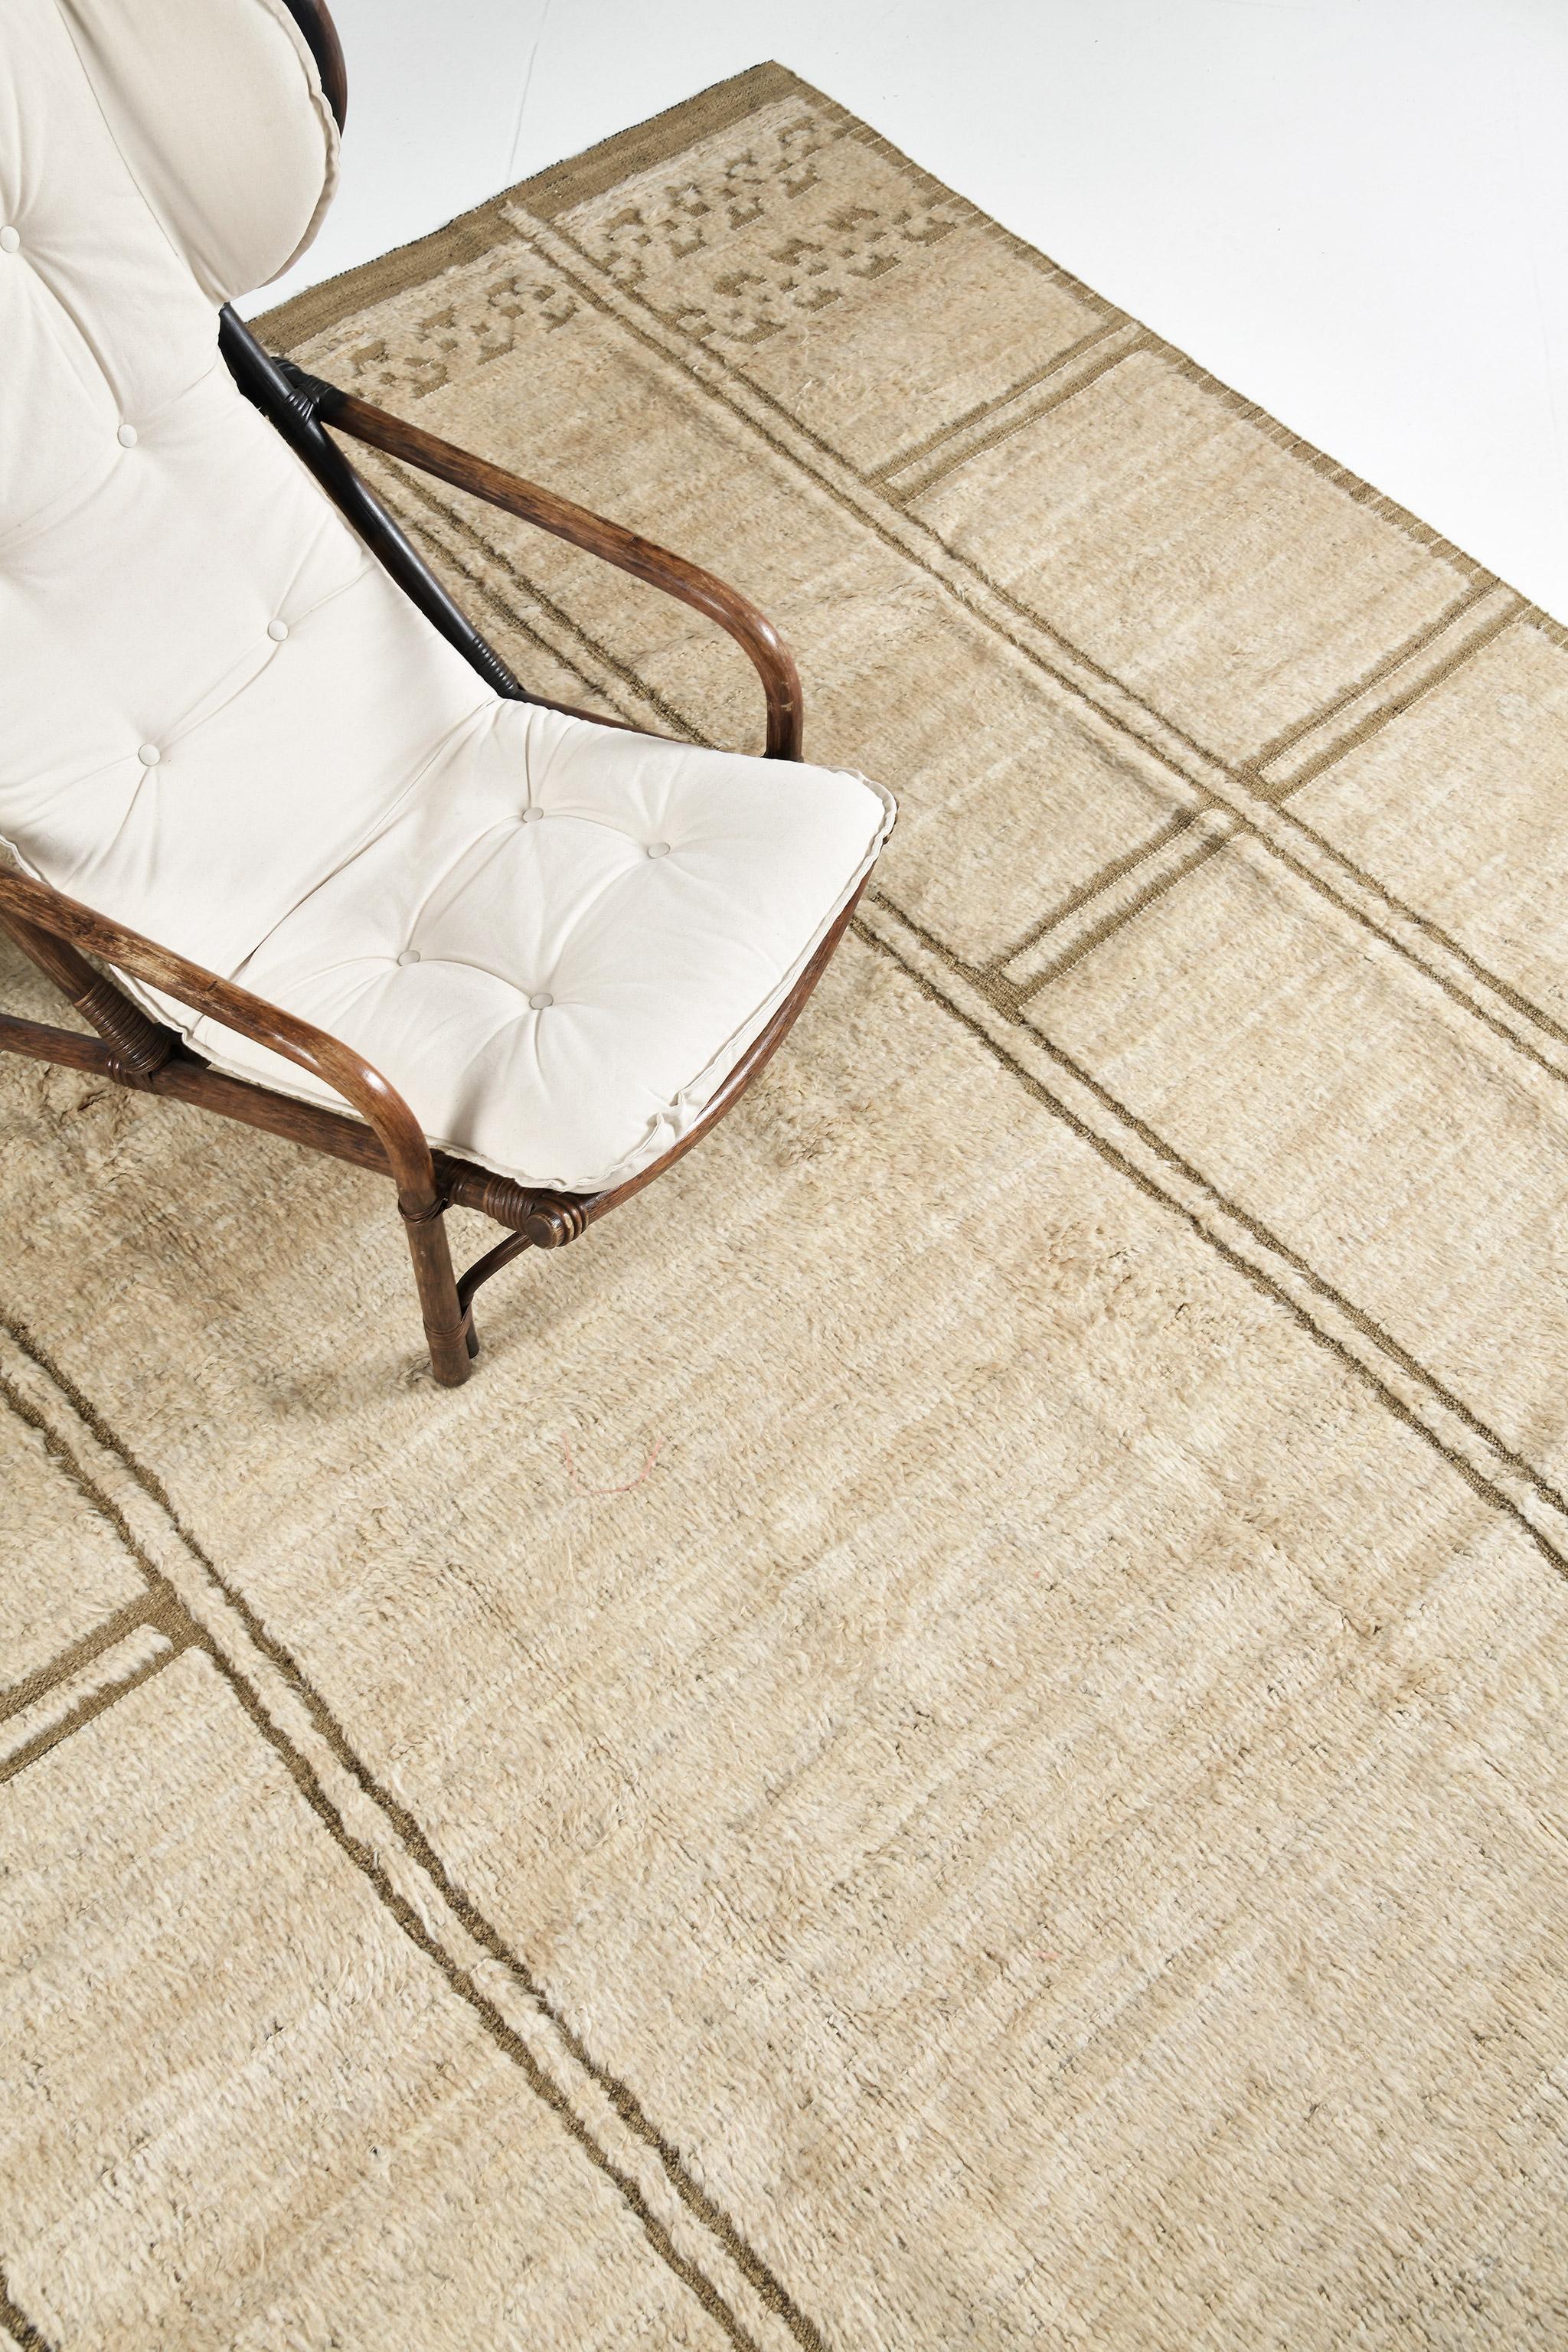 Meddur’ in Nomad Collection features an uneven grid-like rectangular pattern which adds statement and character to this wonderful rug. Rendered in beige and tan, this rug also features symbollical elements on its top and bottom of this exquisite